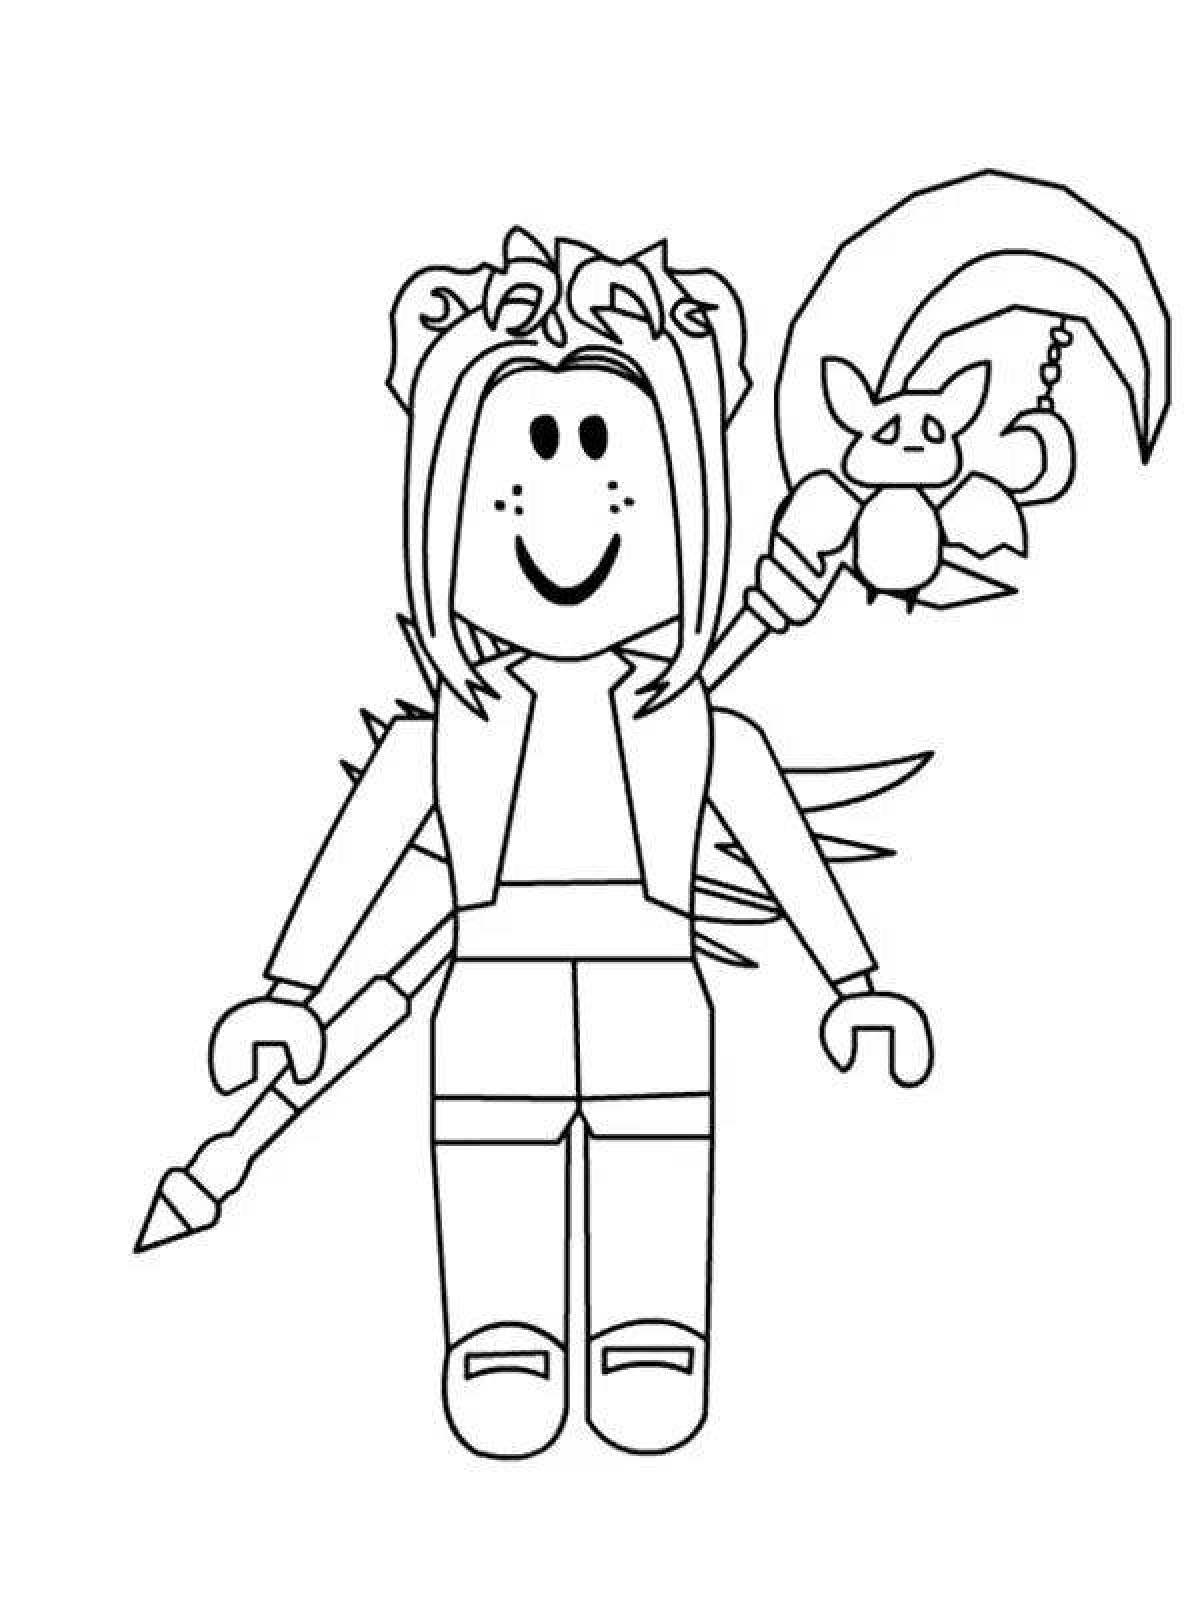 Roblox character coloring page with crazy color